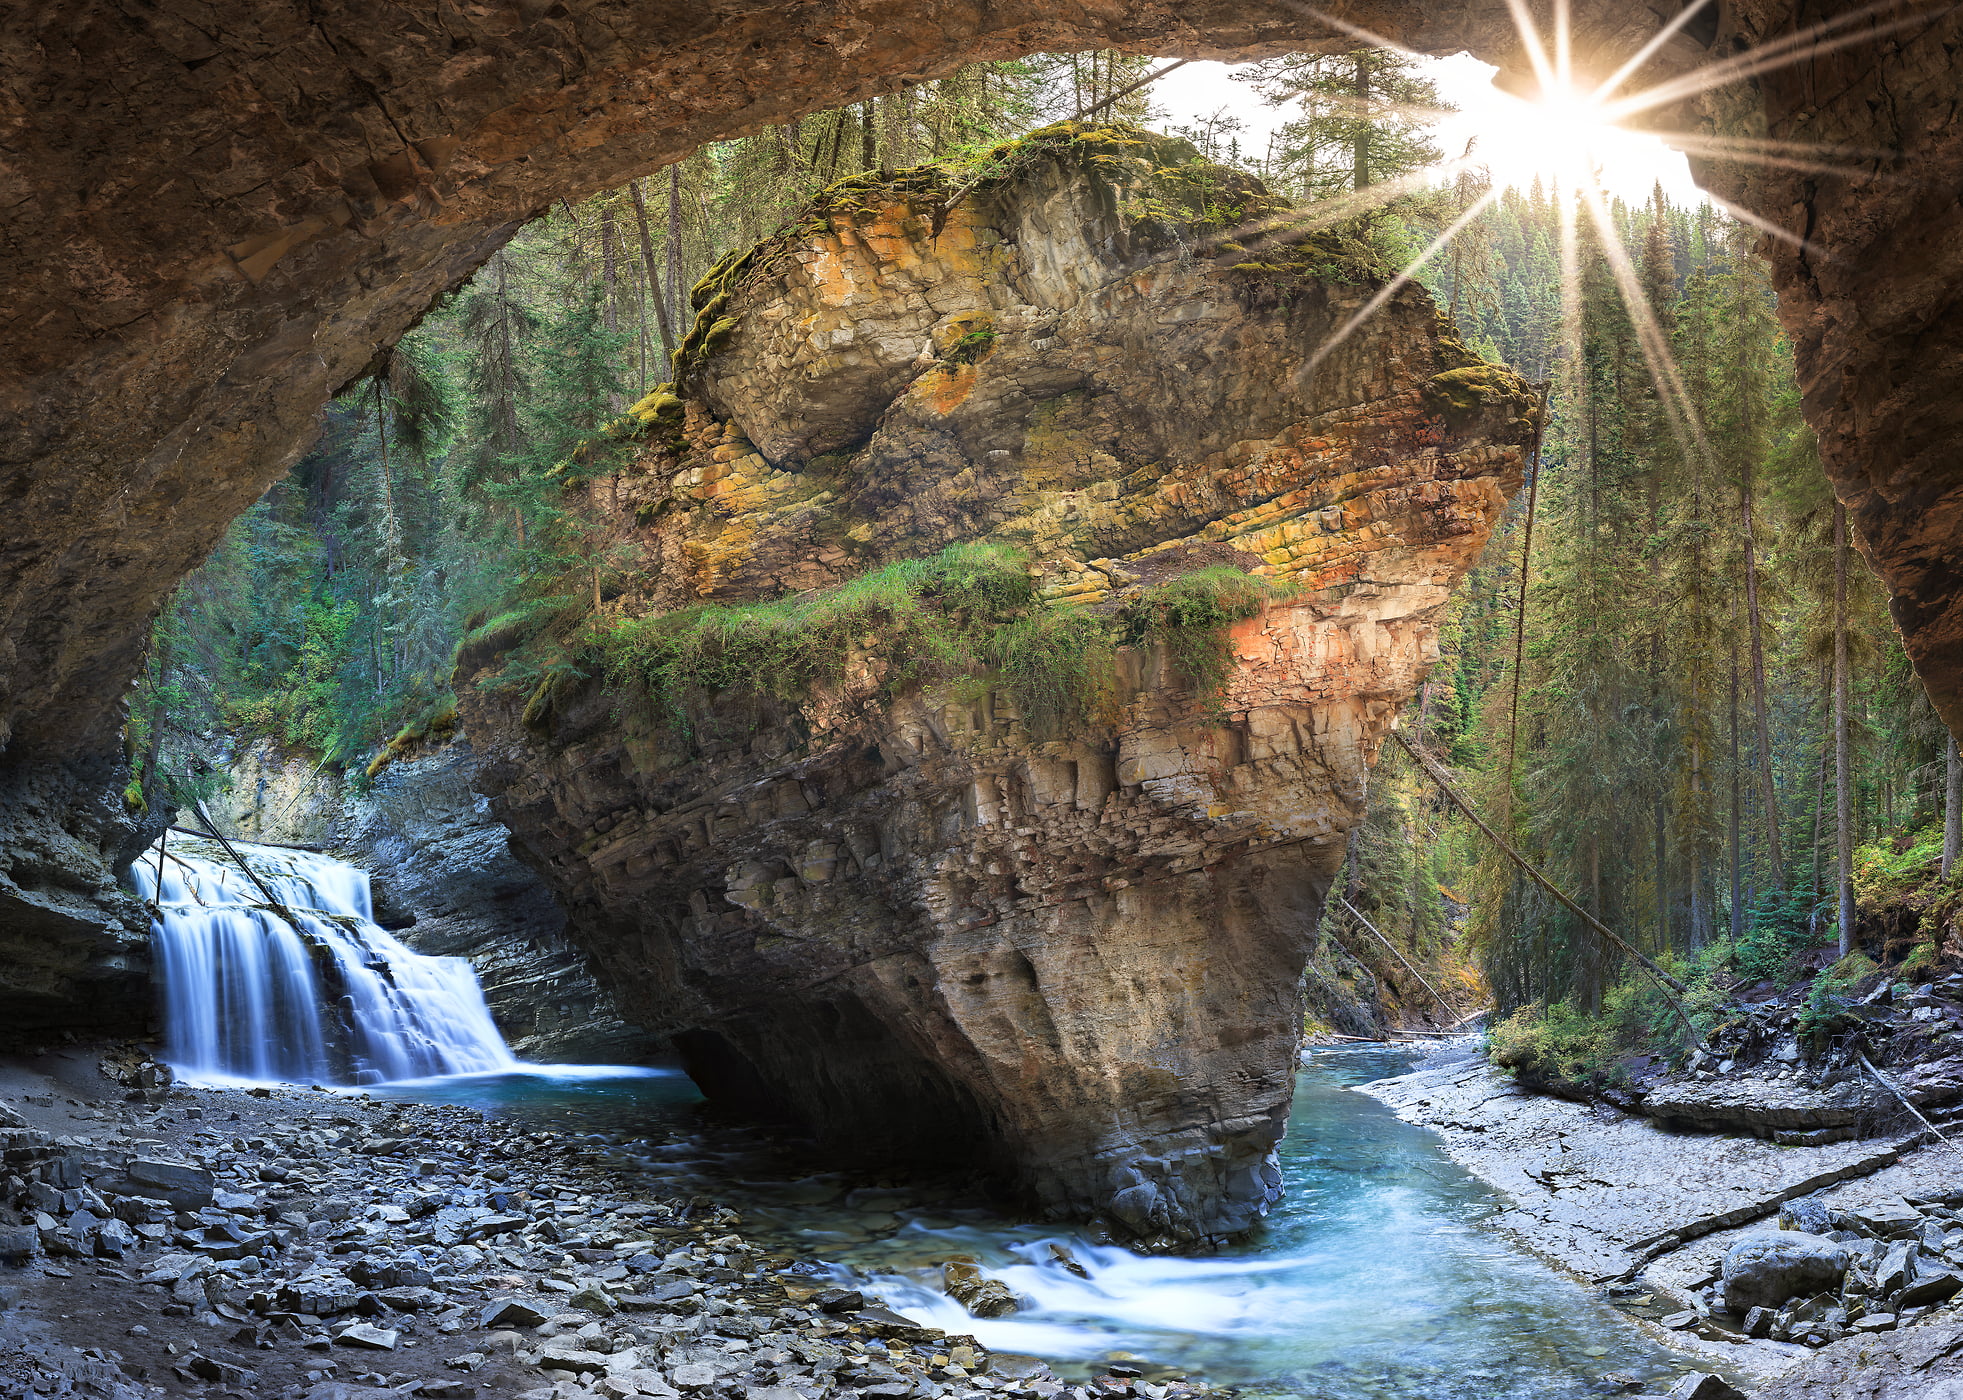 2,458 megapixels! A very high resolution, large-format nature photo of Johnston Canyon Cave, including a stream, waterfall, cave, and rock formation; fine art photograph created by Scott Dimond in Banff National Park, Alberta, Canada